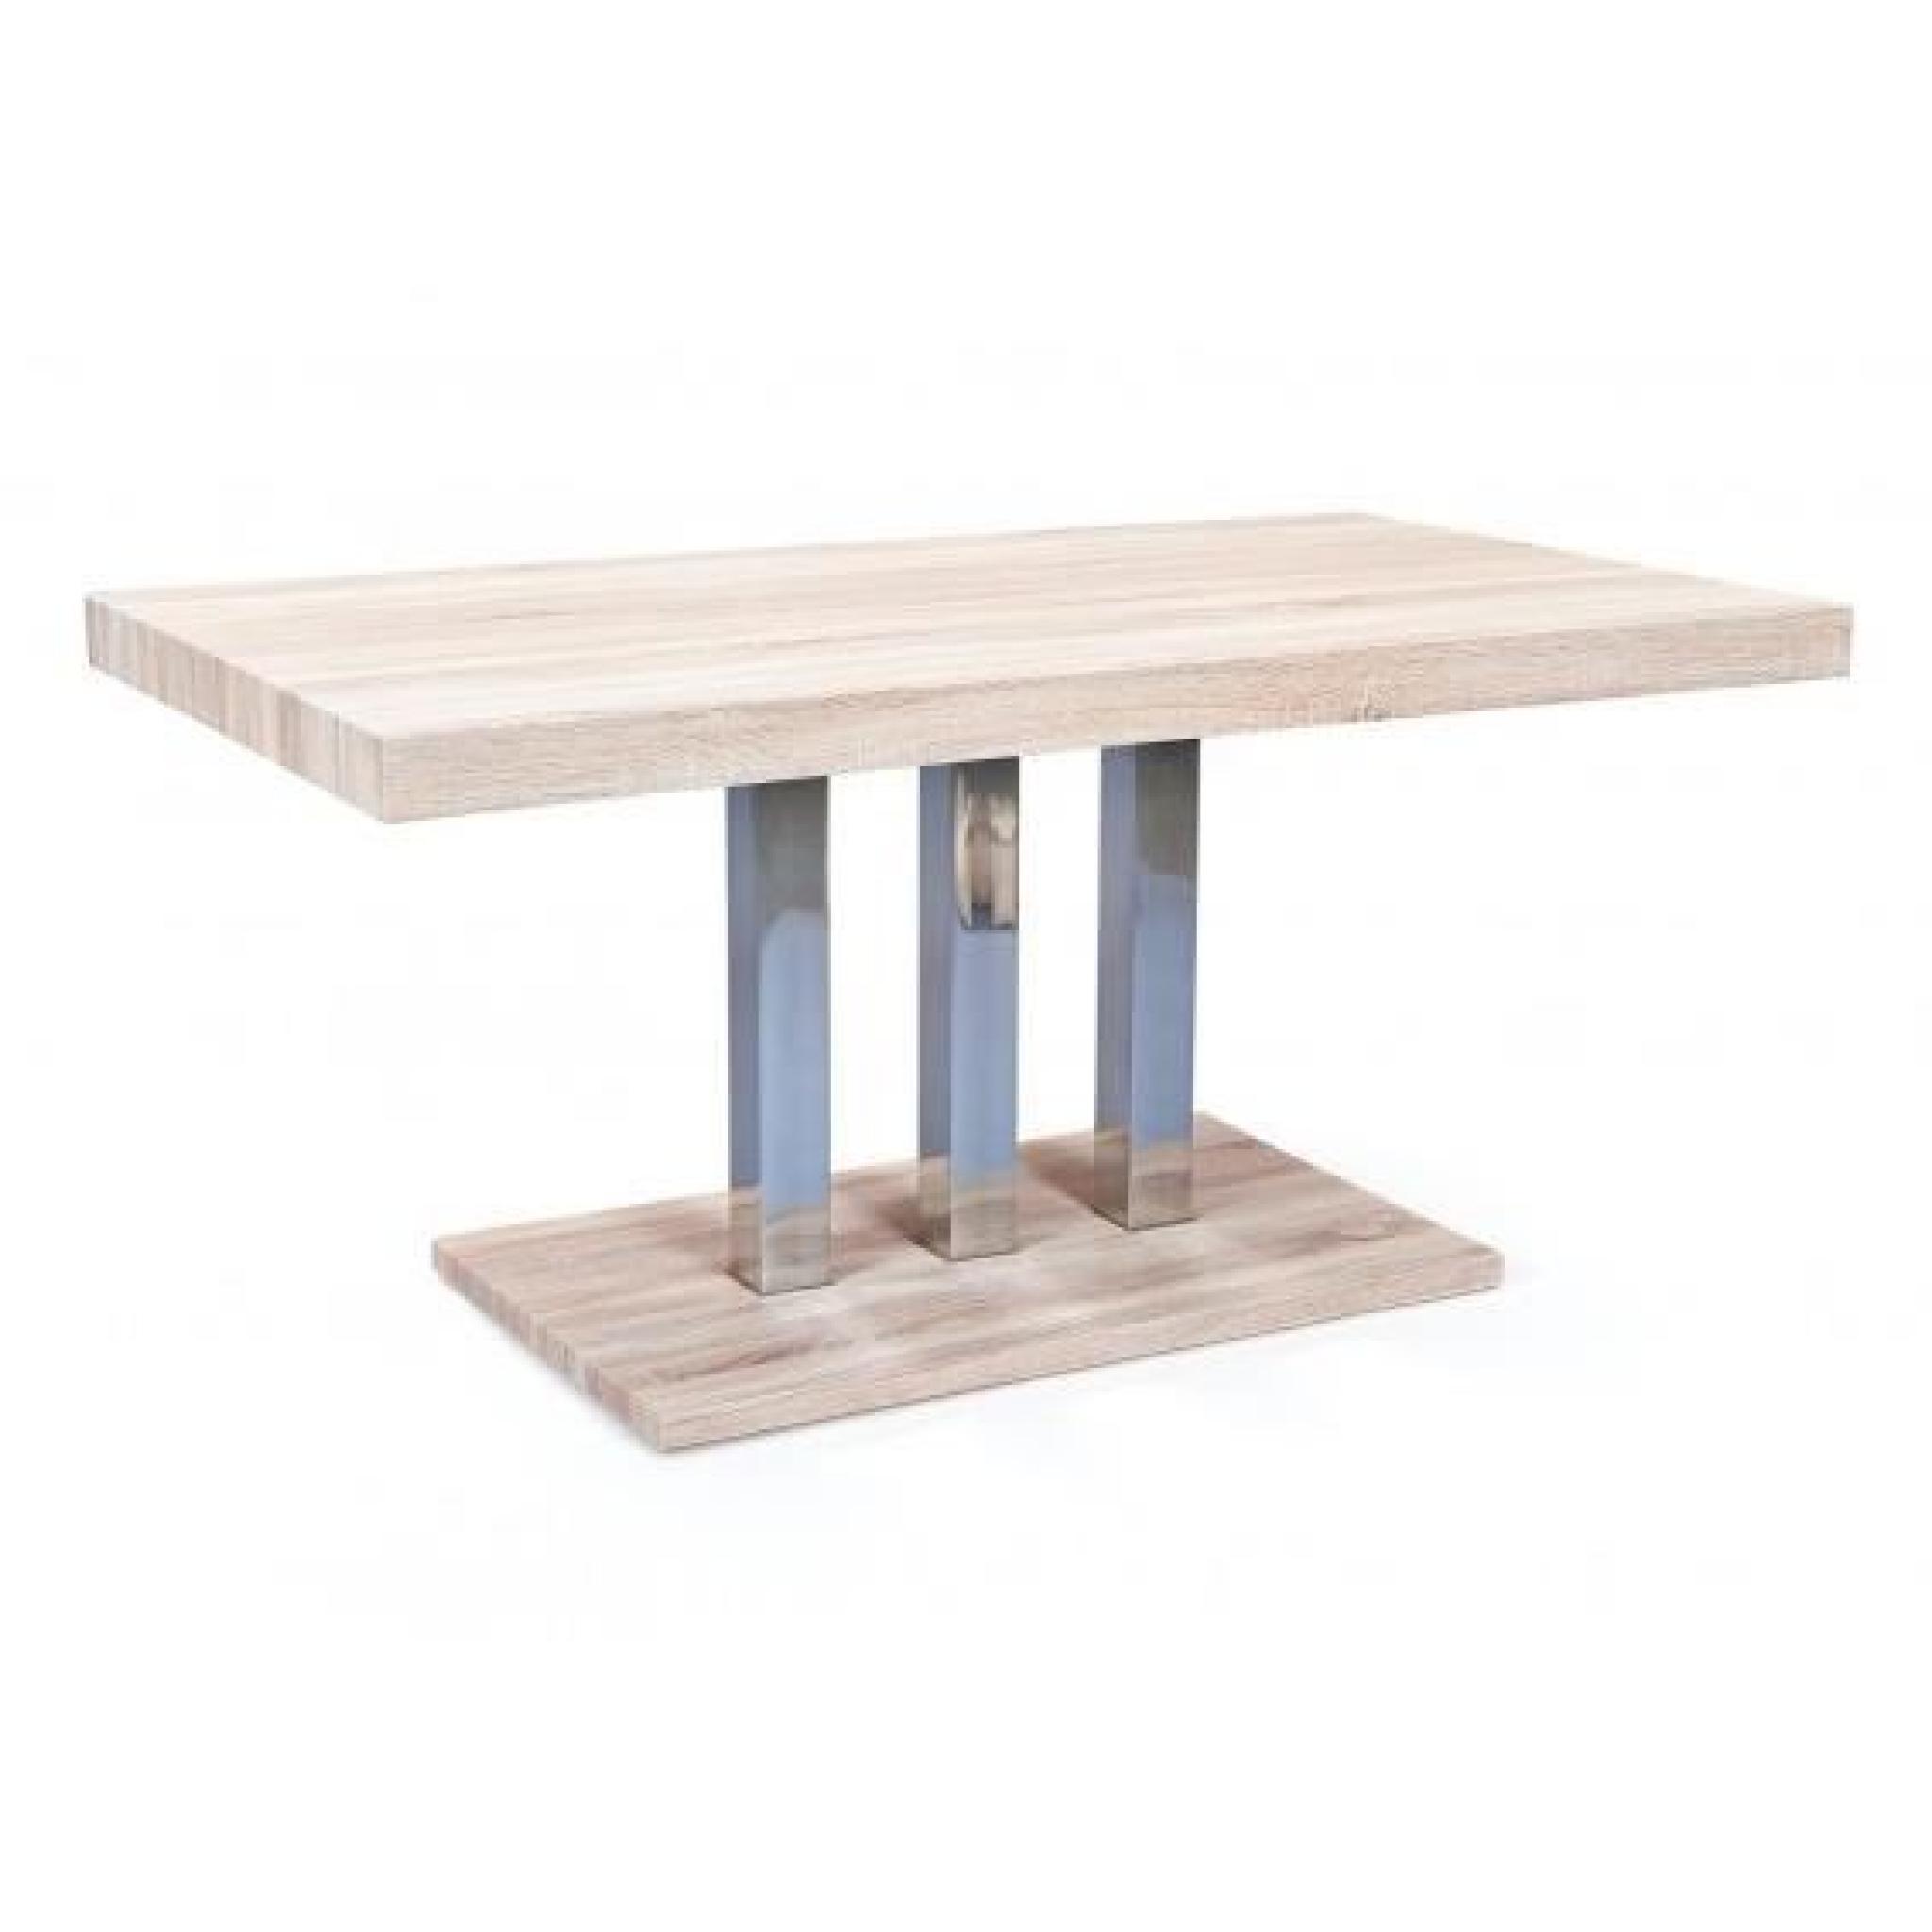 Oyonna - Table Rectangulaire